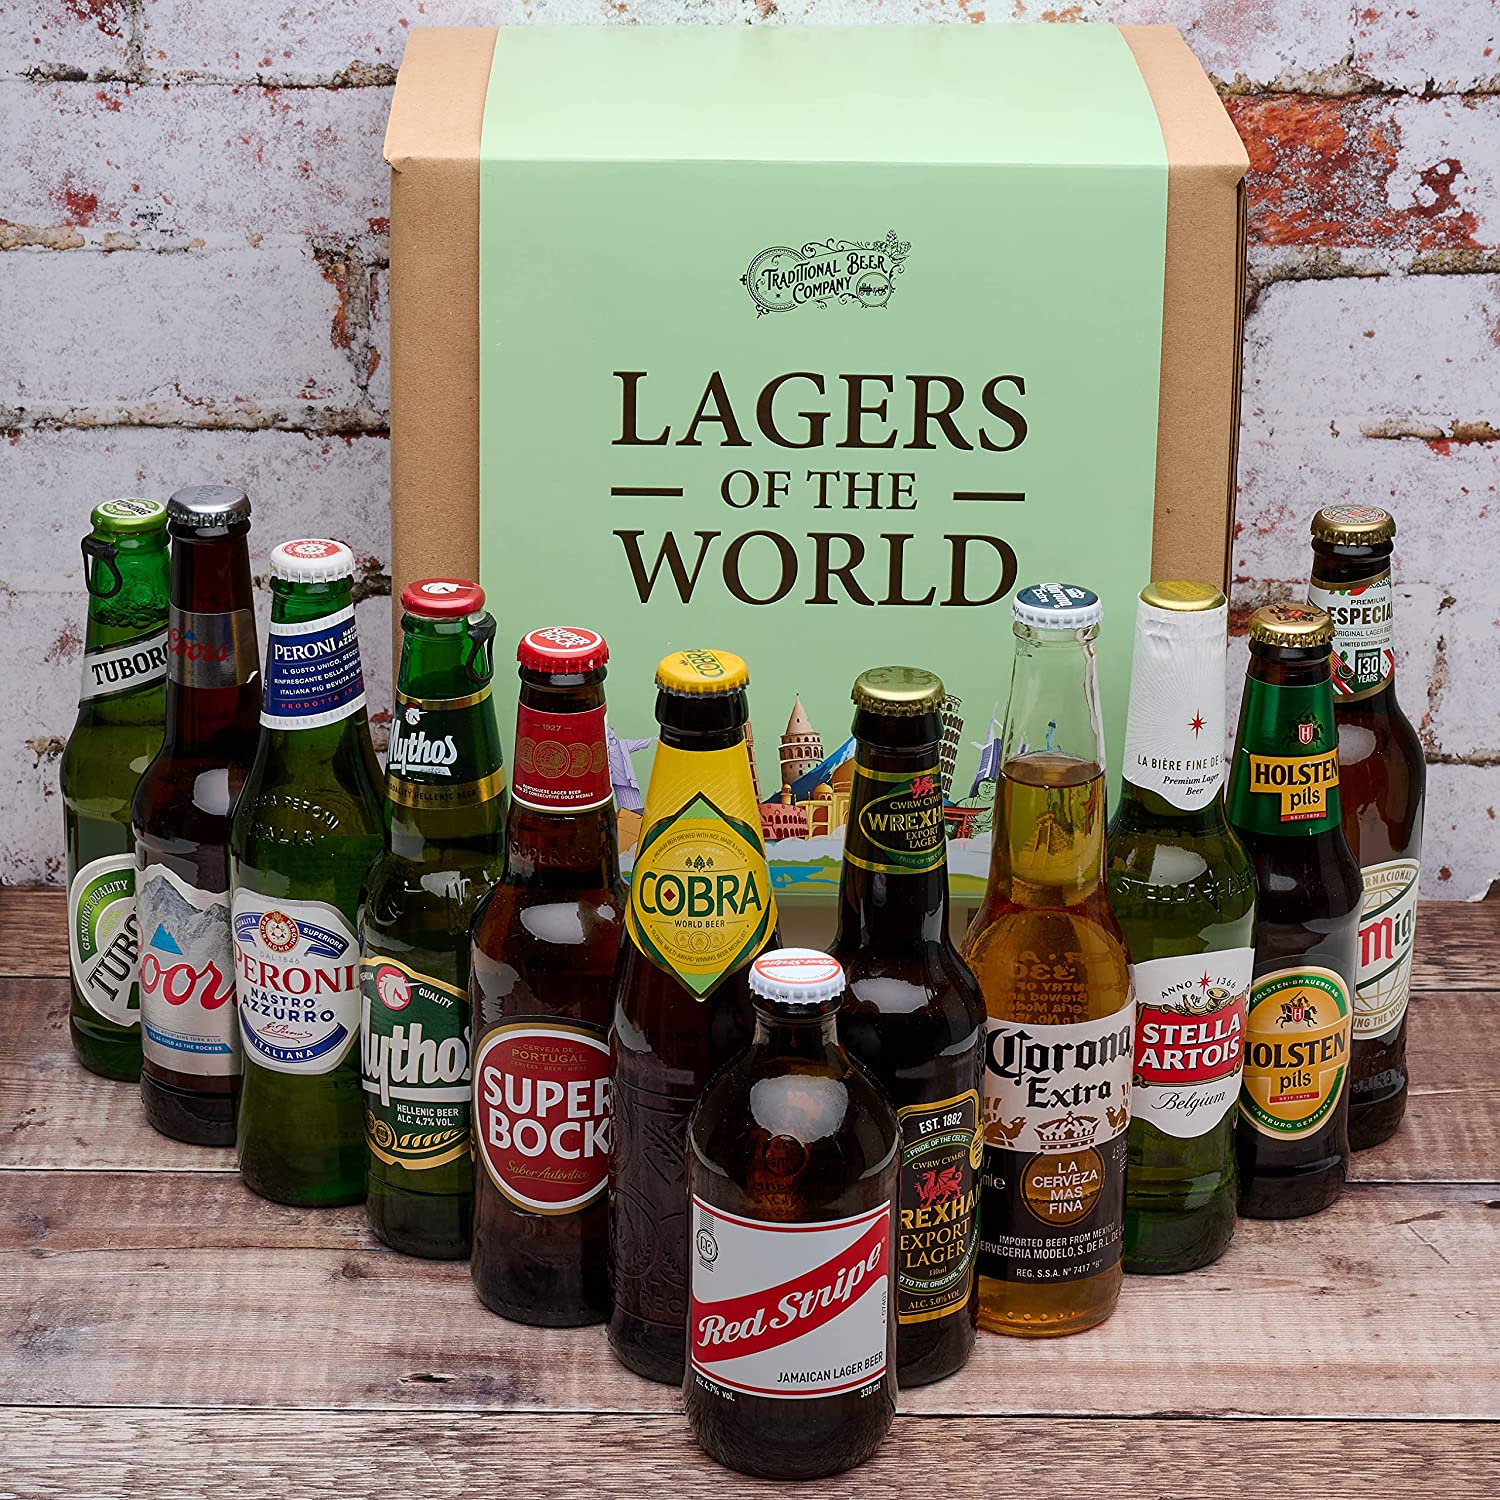 Enjoy 12 tasty beers from around the globe